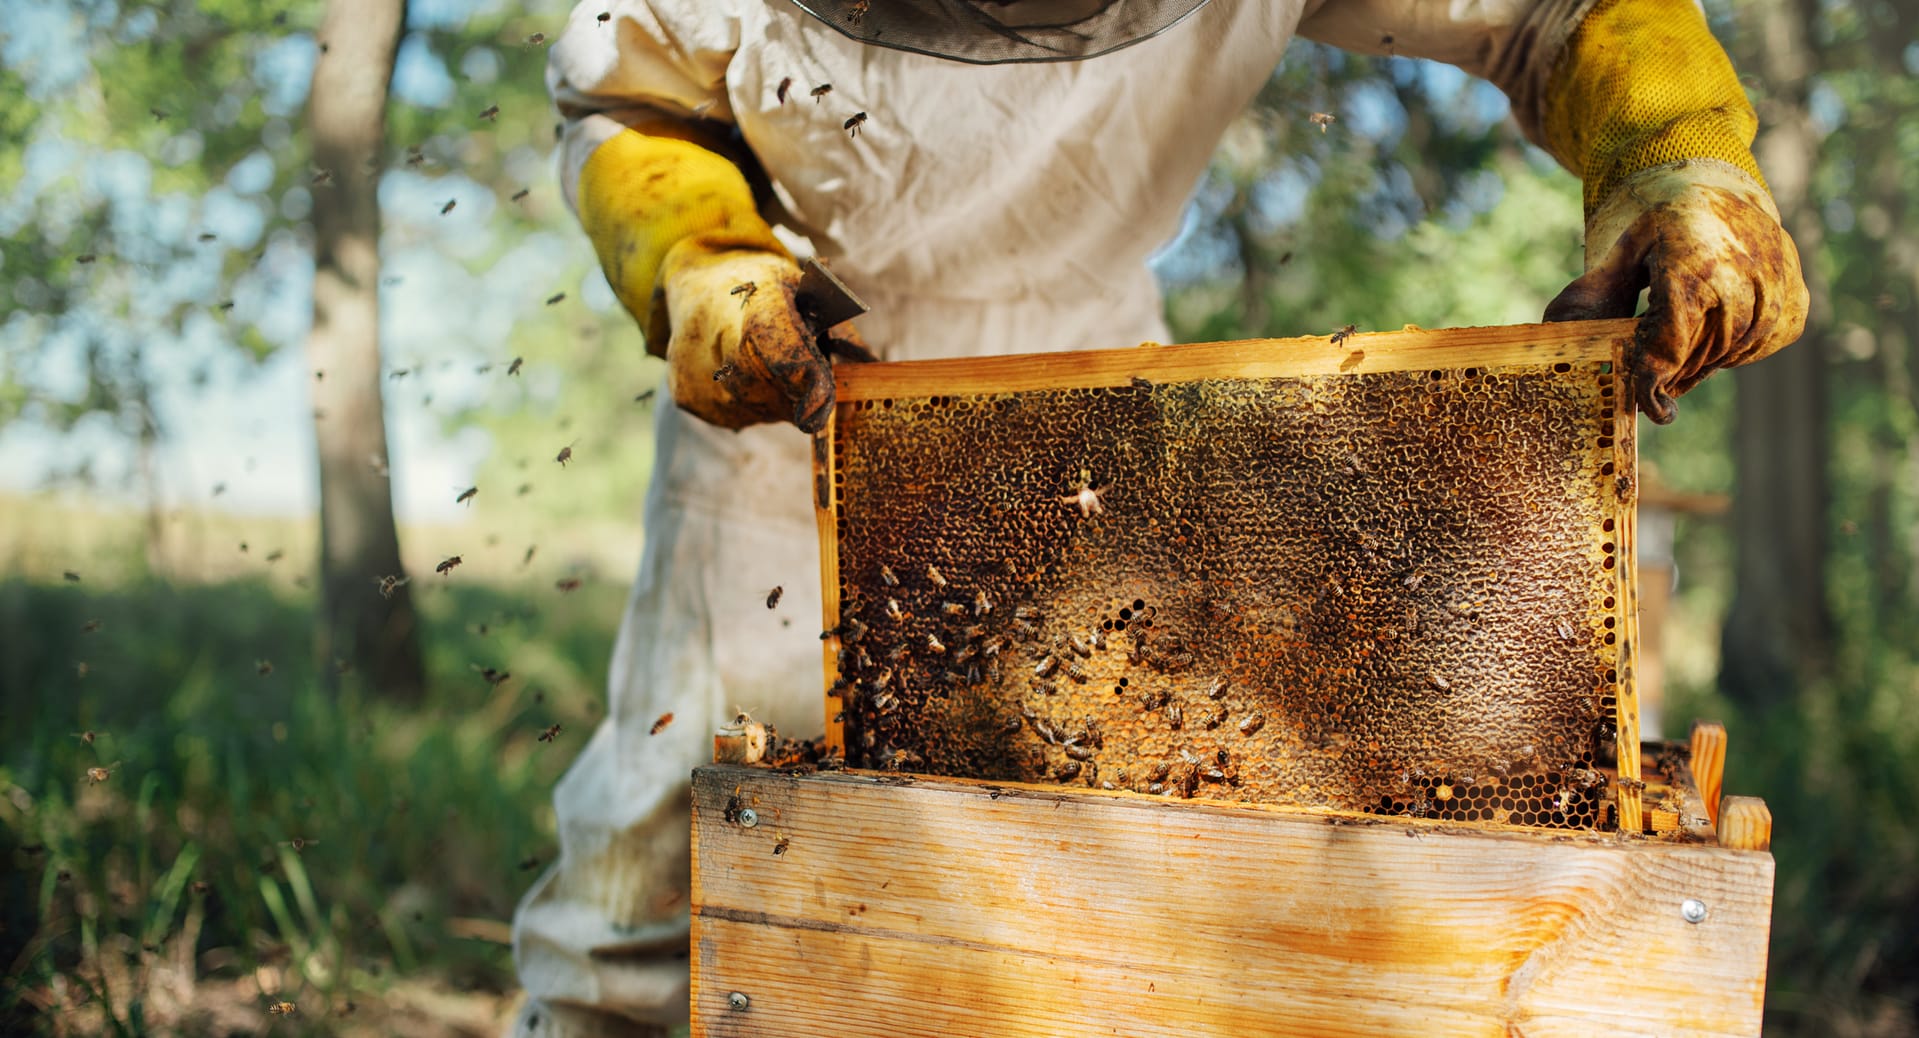 A beekeeper in protective gear harvesting honey from a beehive